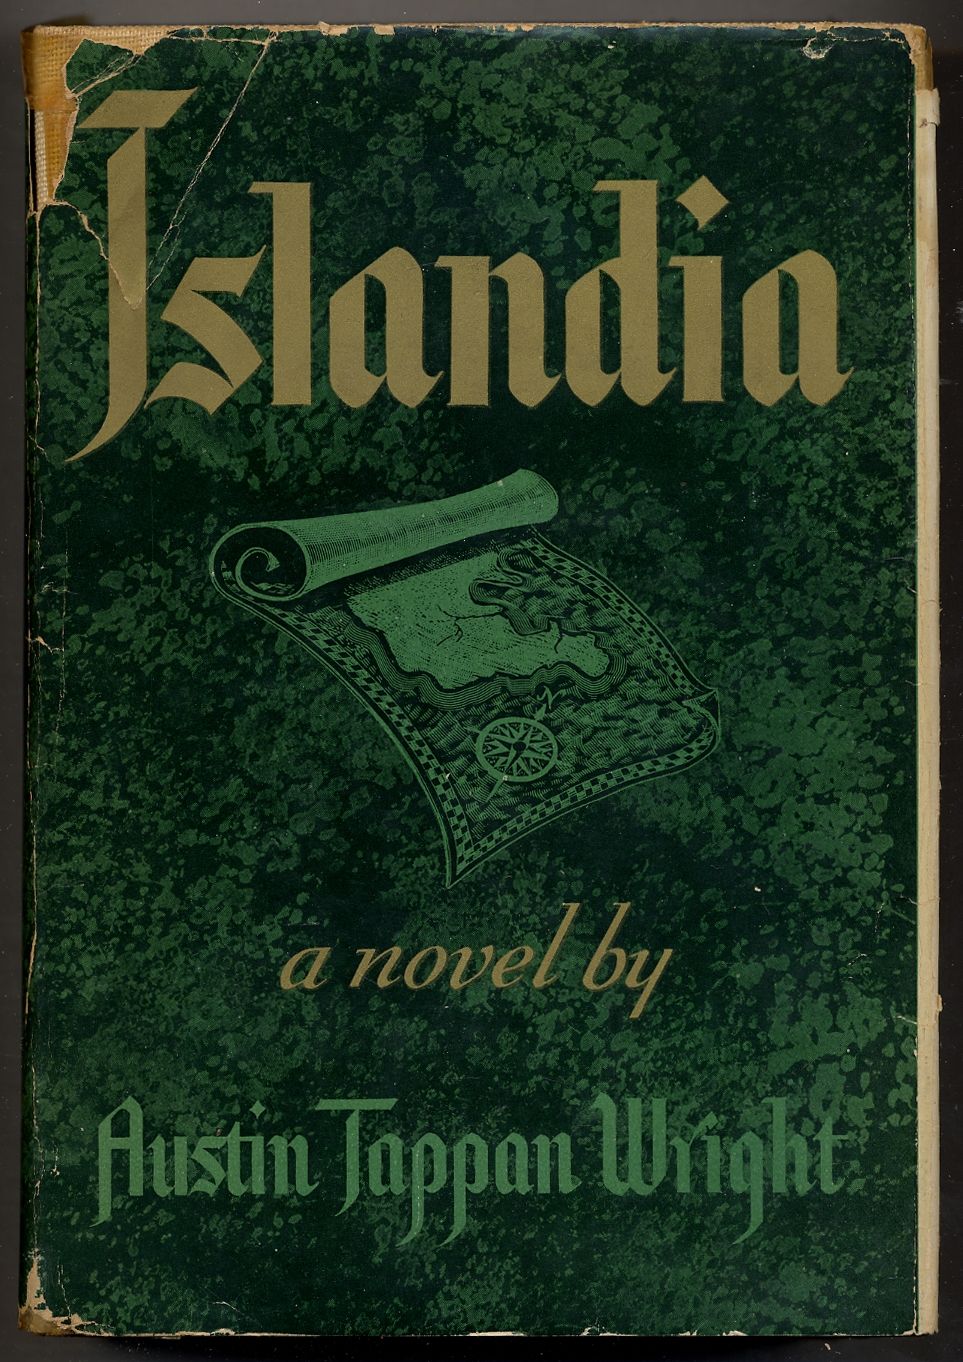 Cover of 1st edition of Islandia by Wright